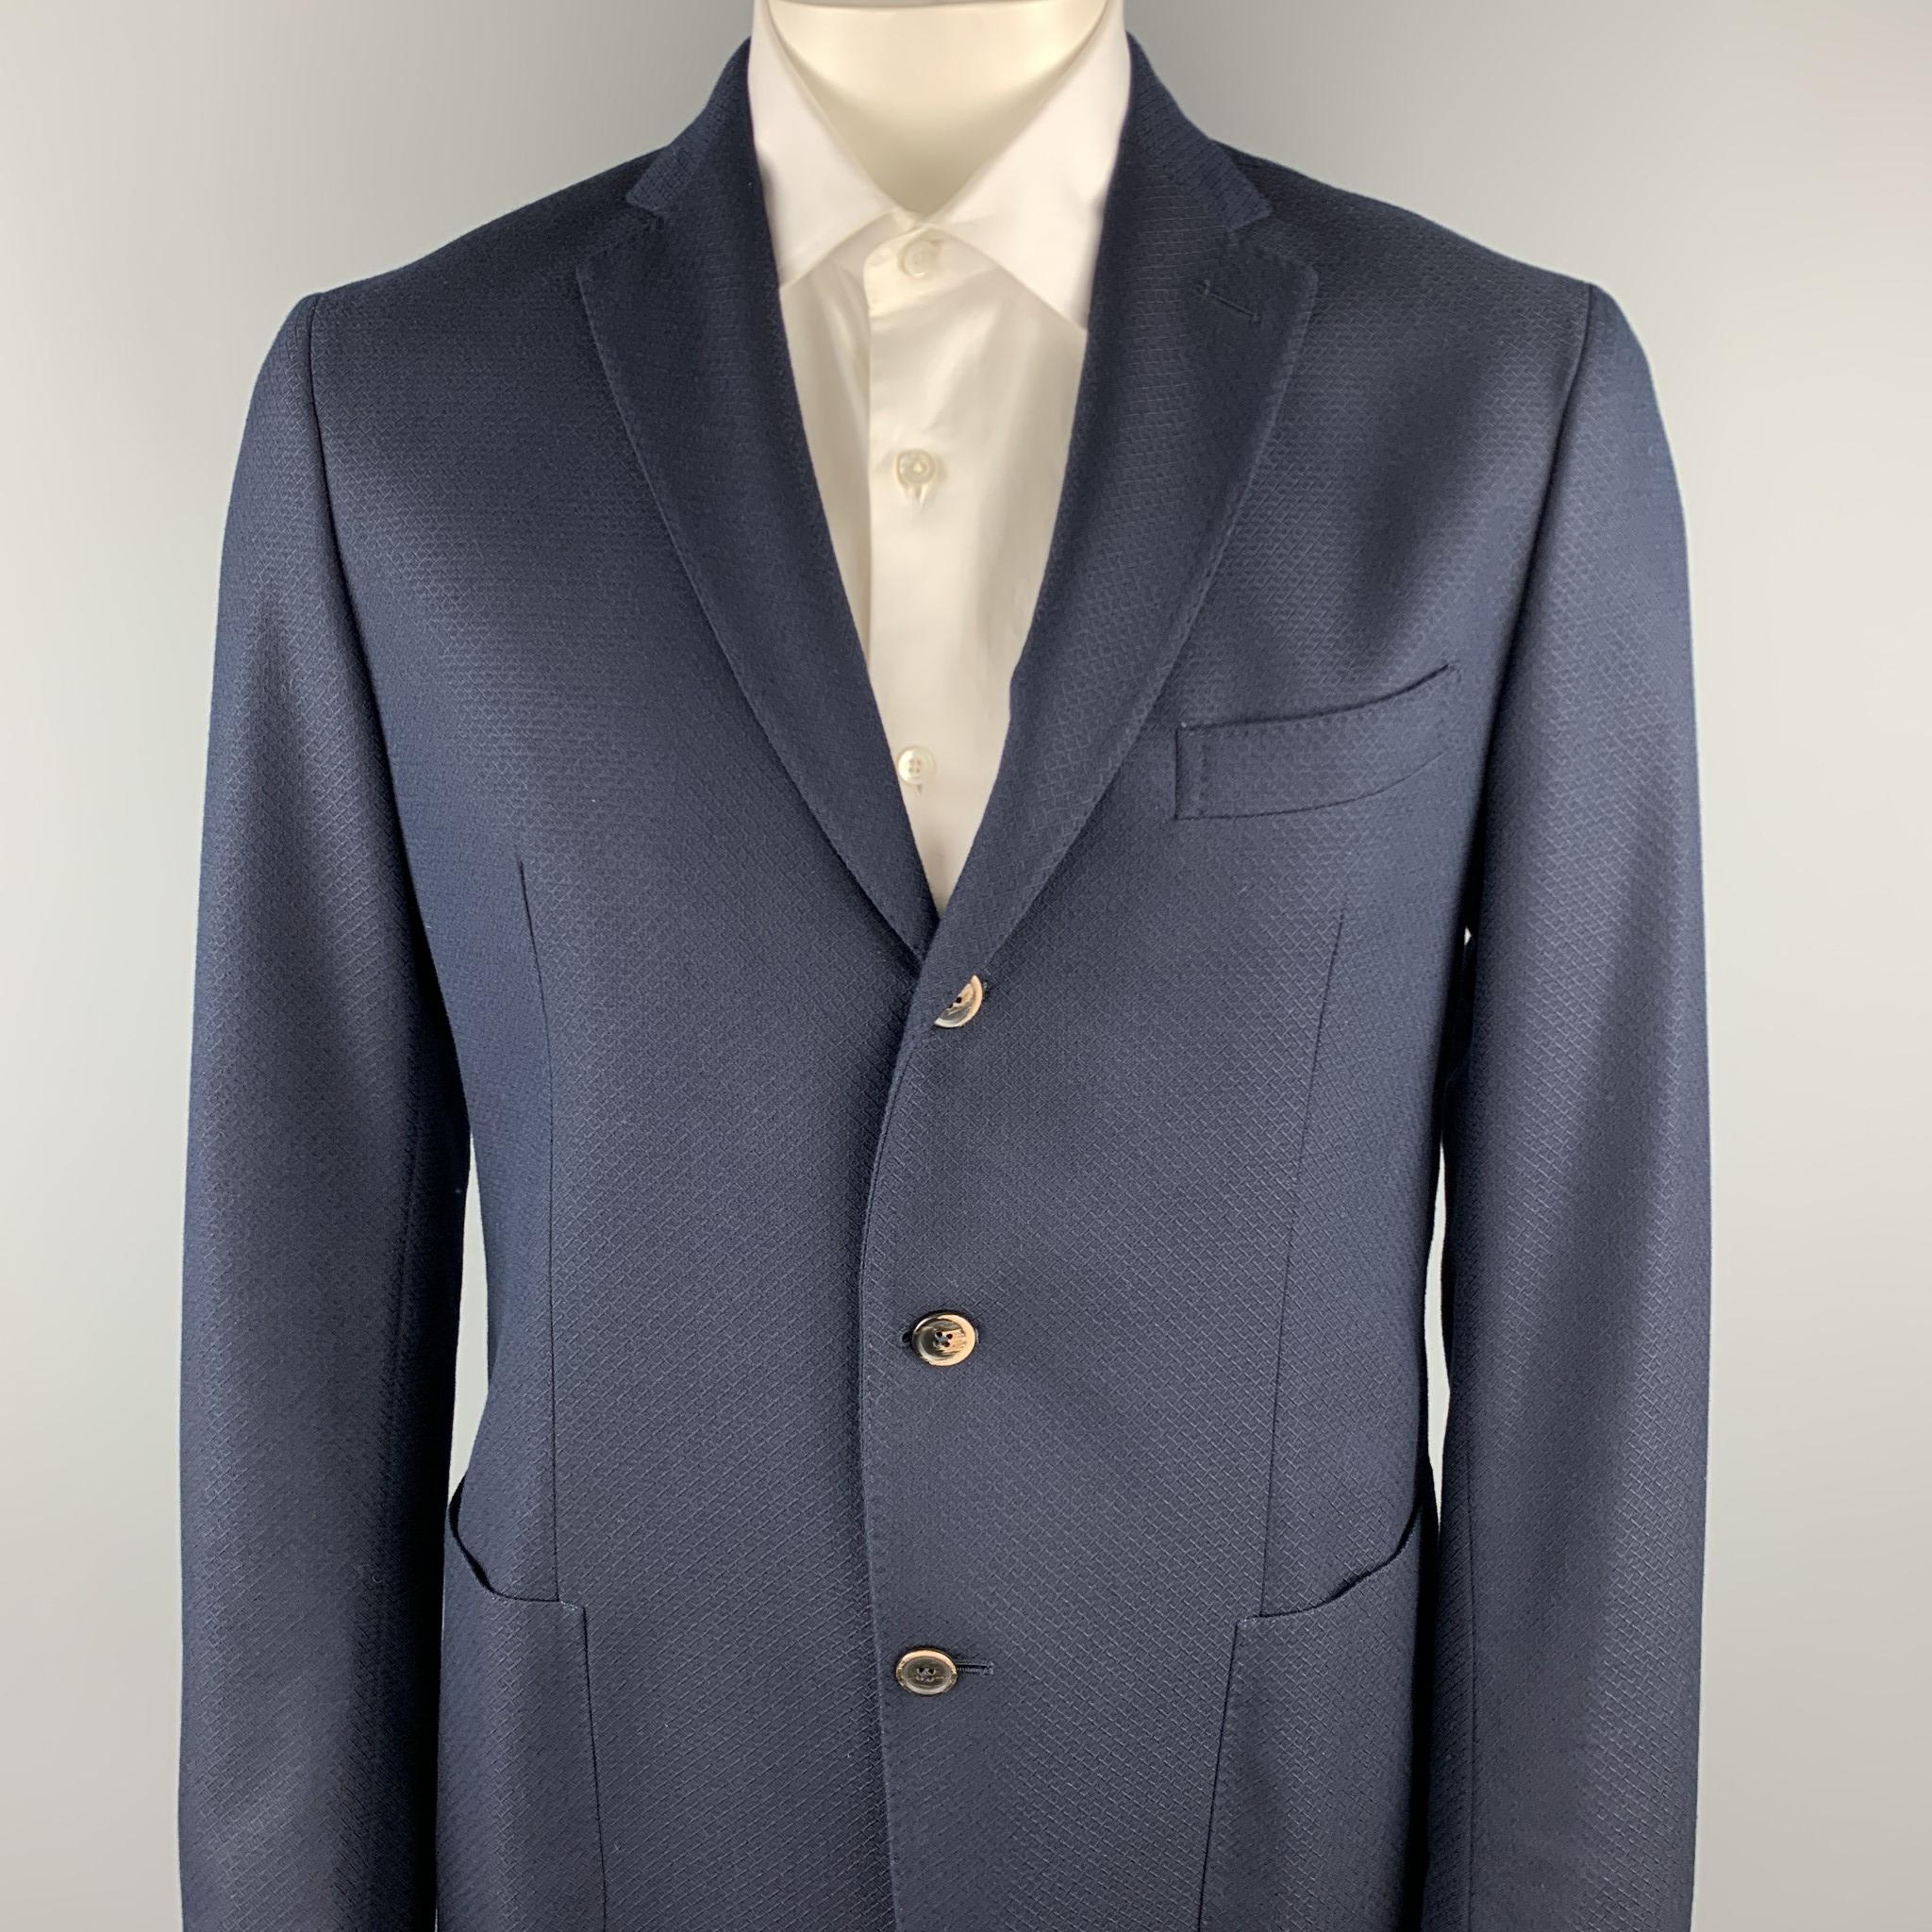 SAKS FIFTH AVENUE sport coat comes in a navy textured cotton / wool with a half liner featuring a notch lapel, patch pockets, and a three button closure. Made in Italy.

Excellent Pre-Owned Condition.
Marked: 44 R

Measurements:

Shoulder: 18 in.